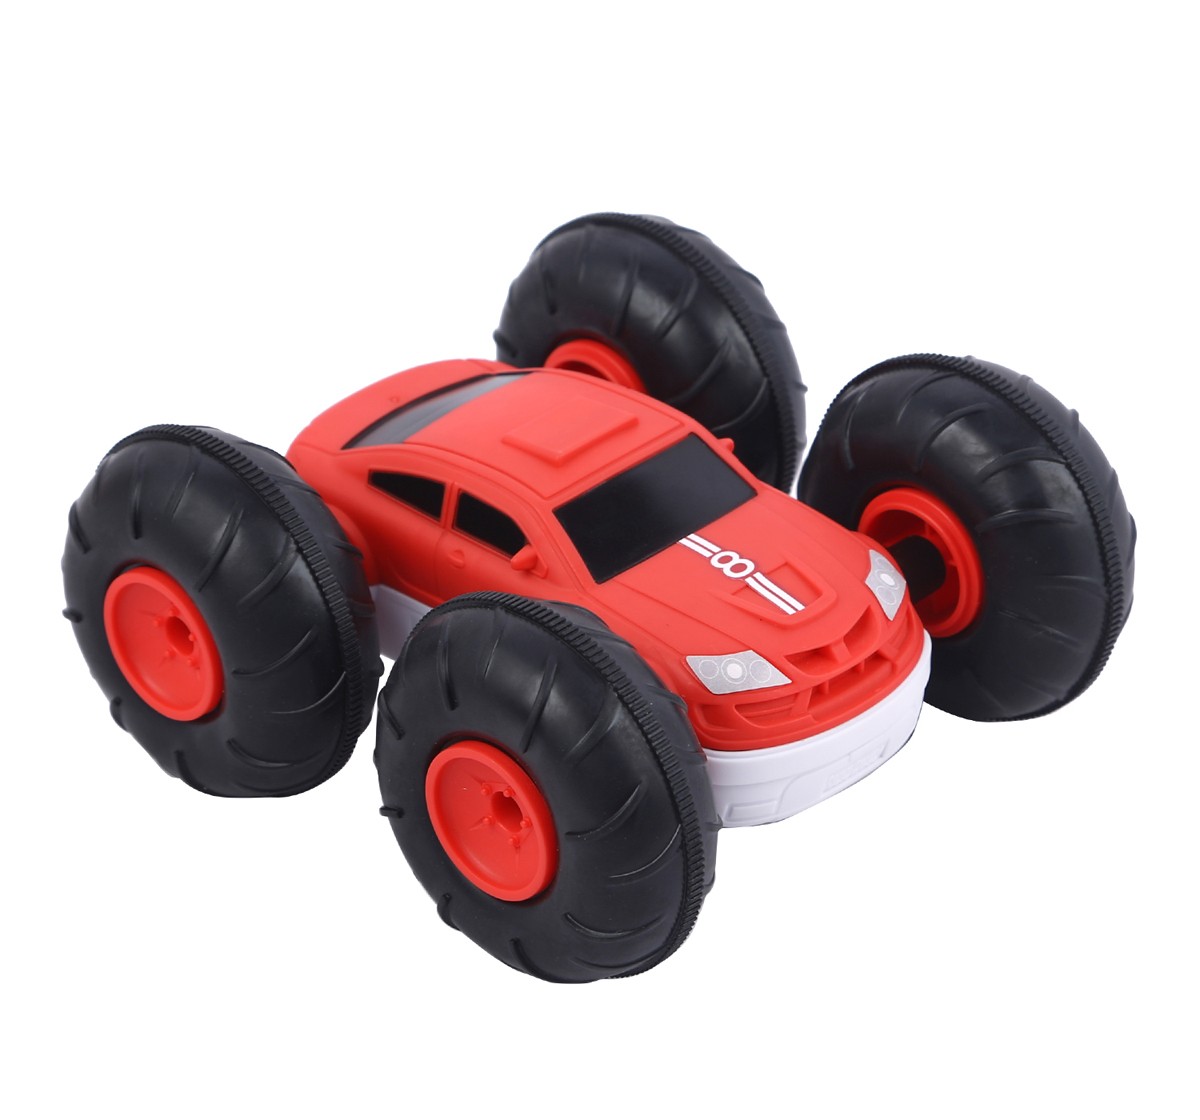 Flip Stunt Rally Car Remote Controlled Car by Sharper Image, For Kids 6 Years and Above, Red